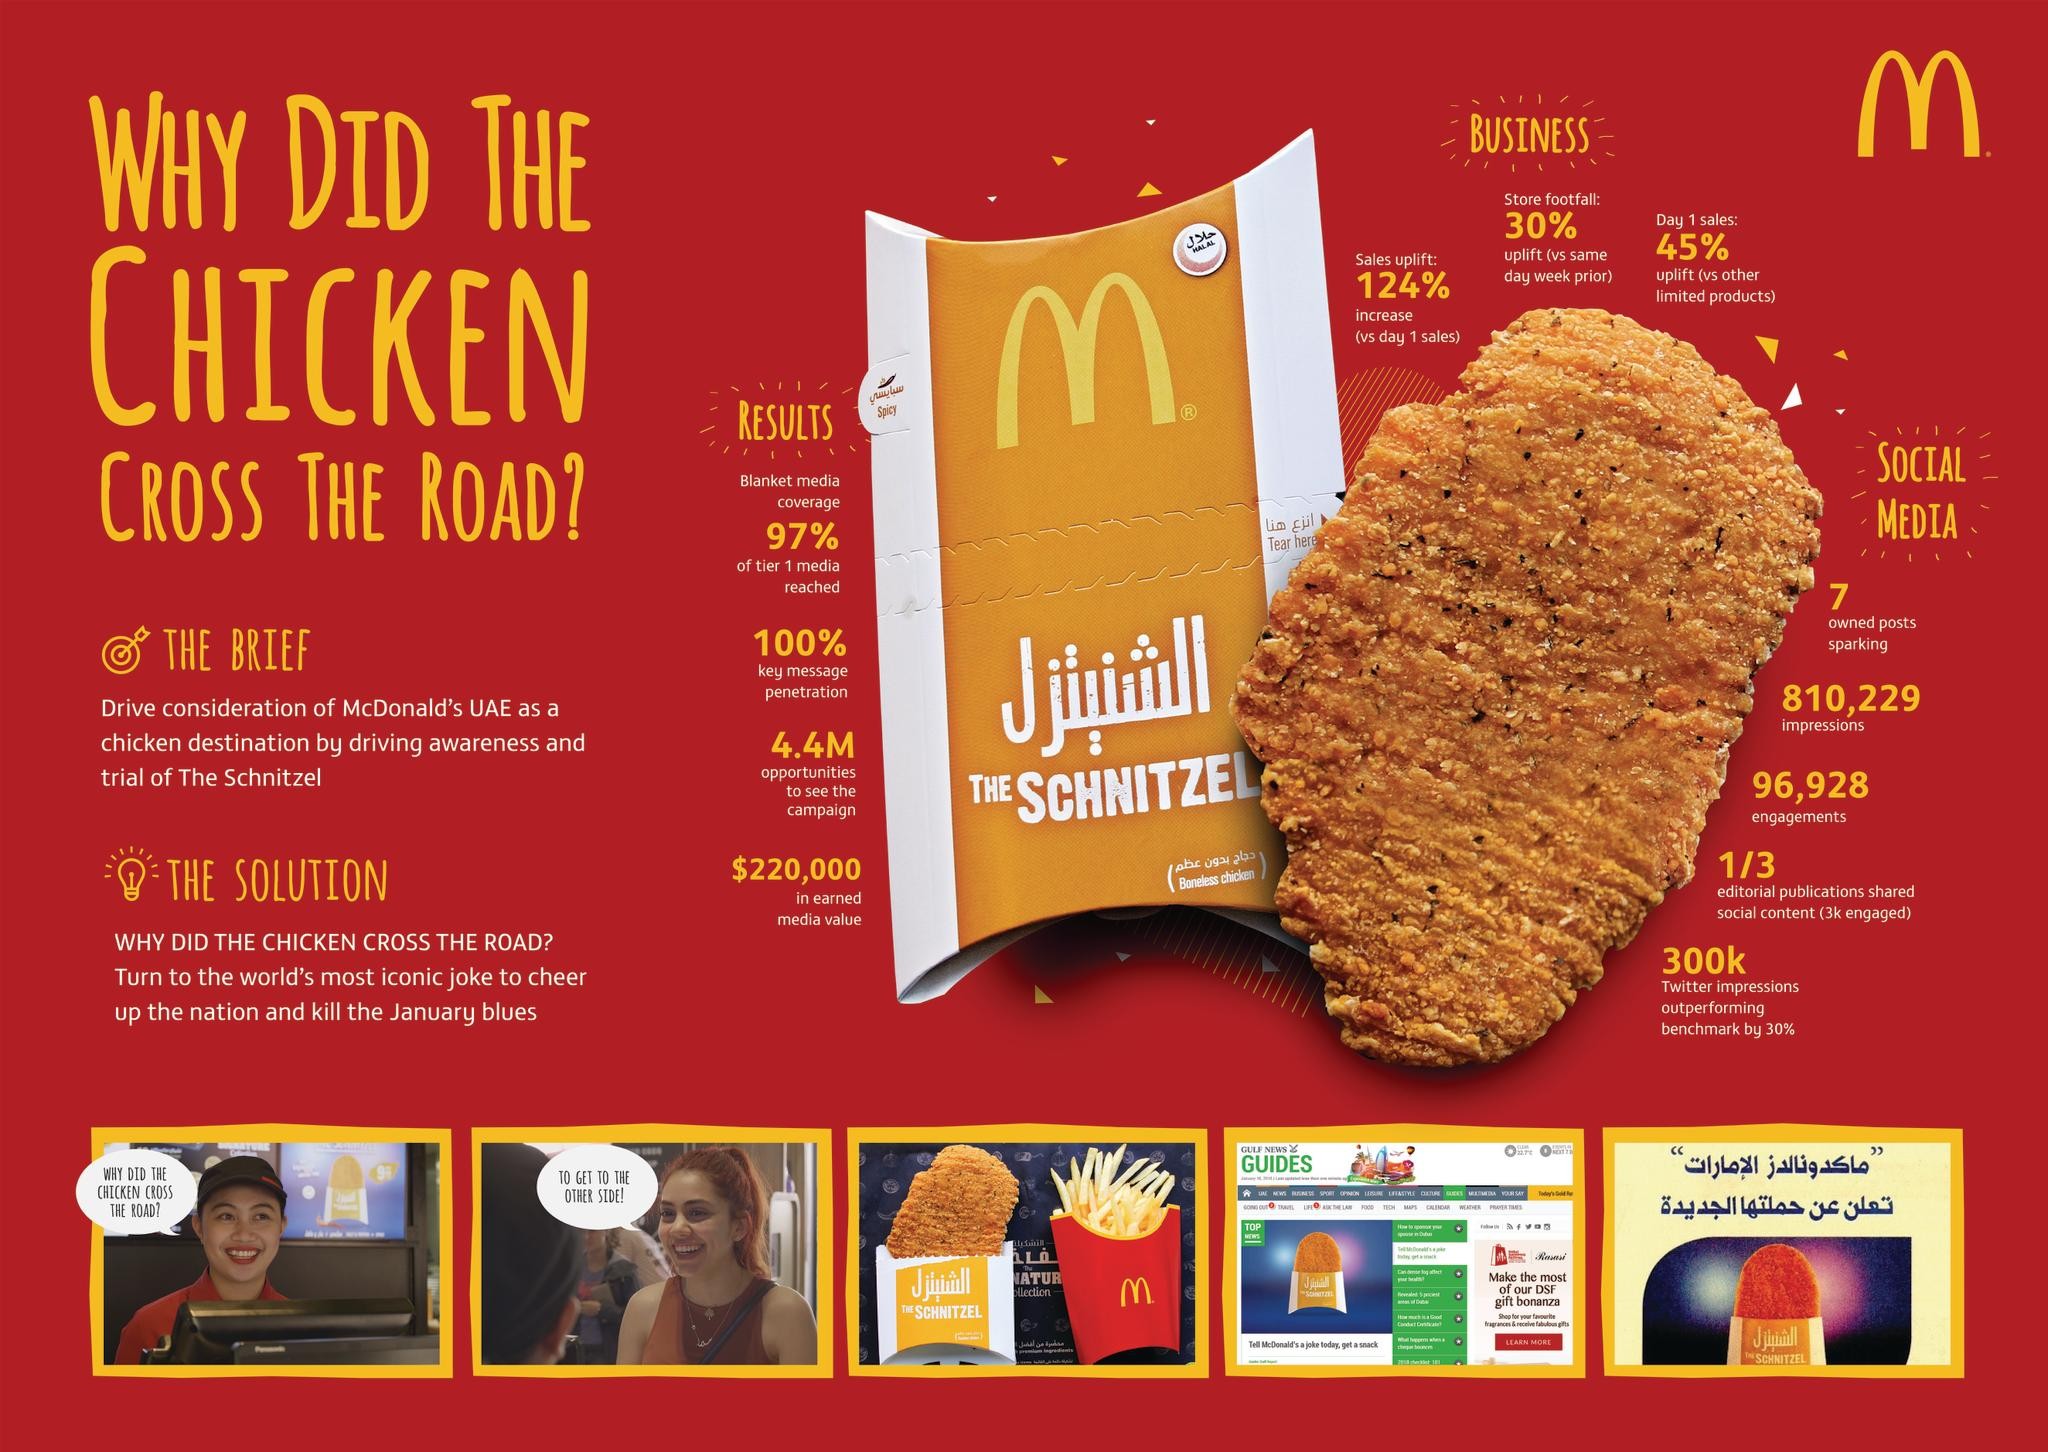 Cashing in on Comedy as Currency for McDonald's UAE